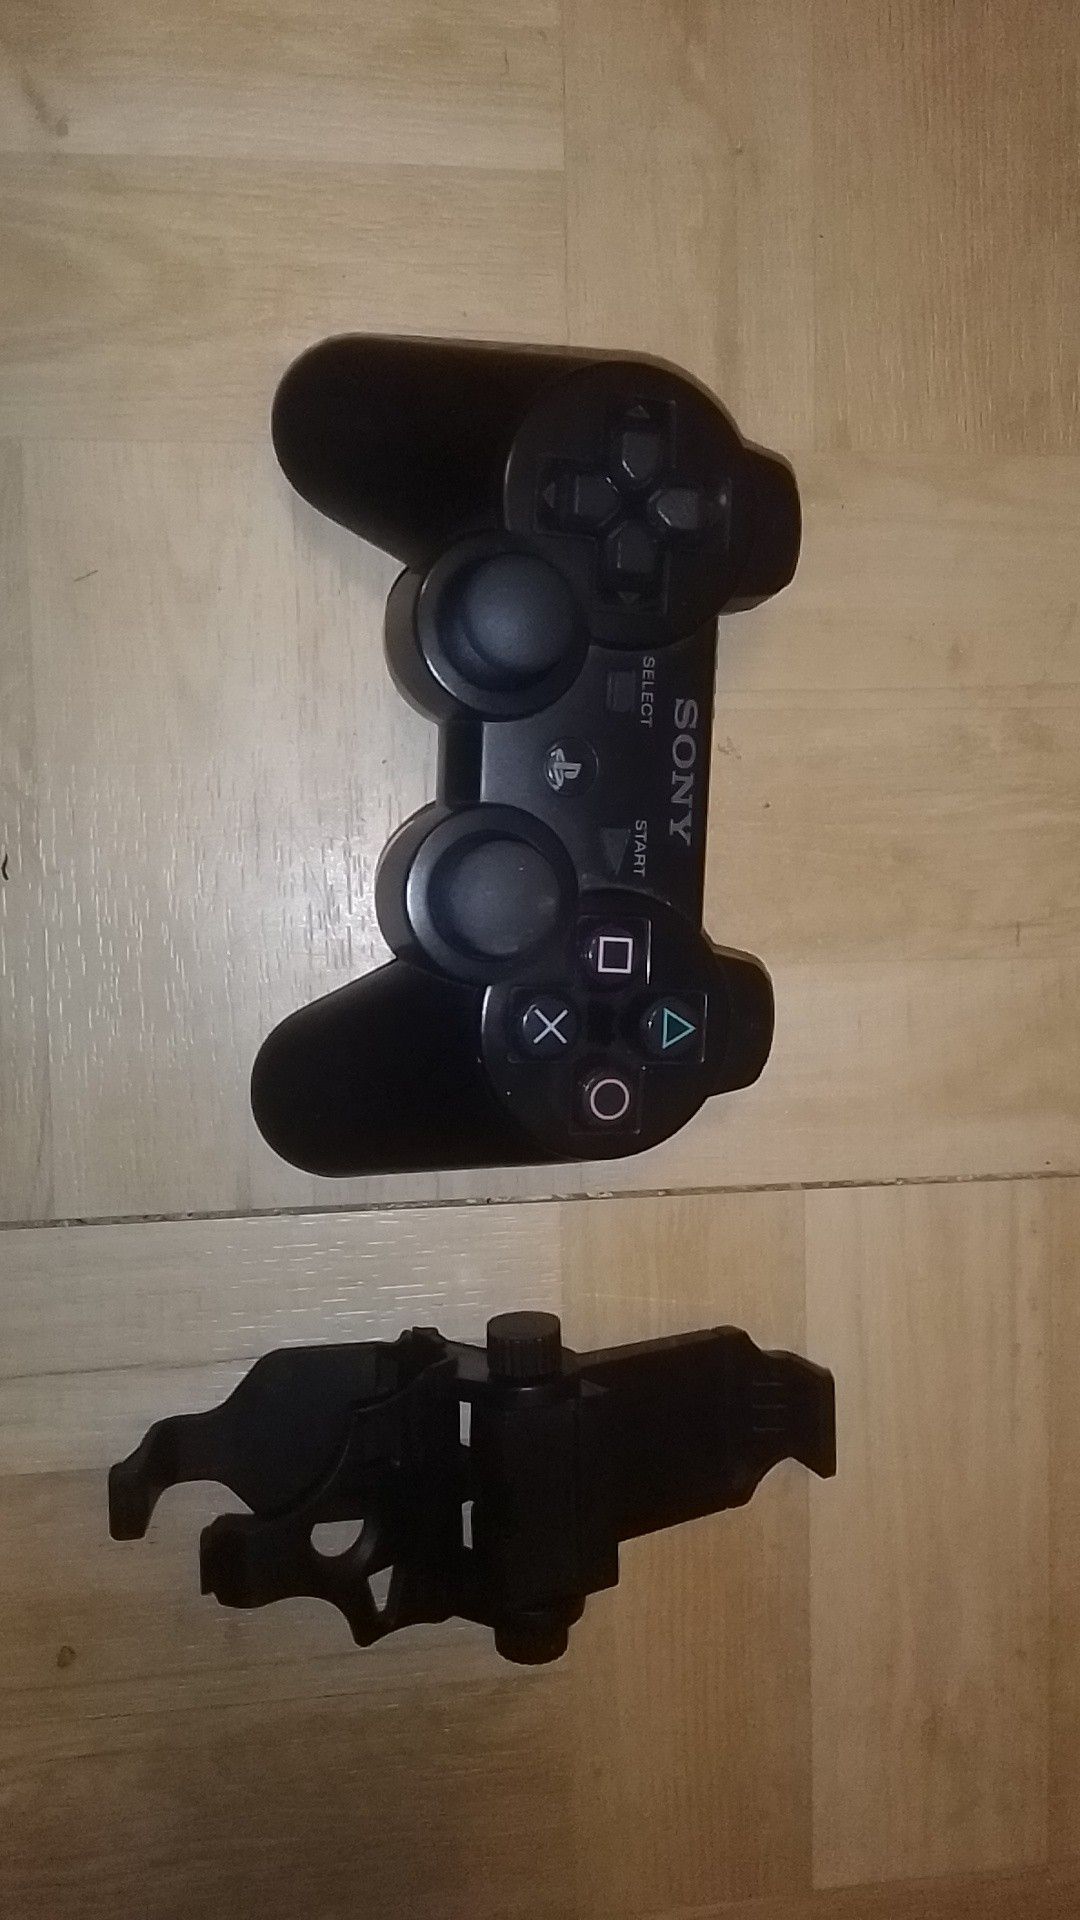 Official PS3 controller with phone attachment